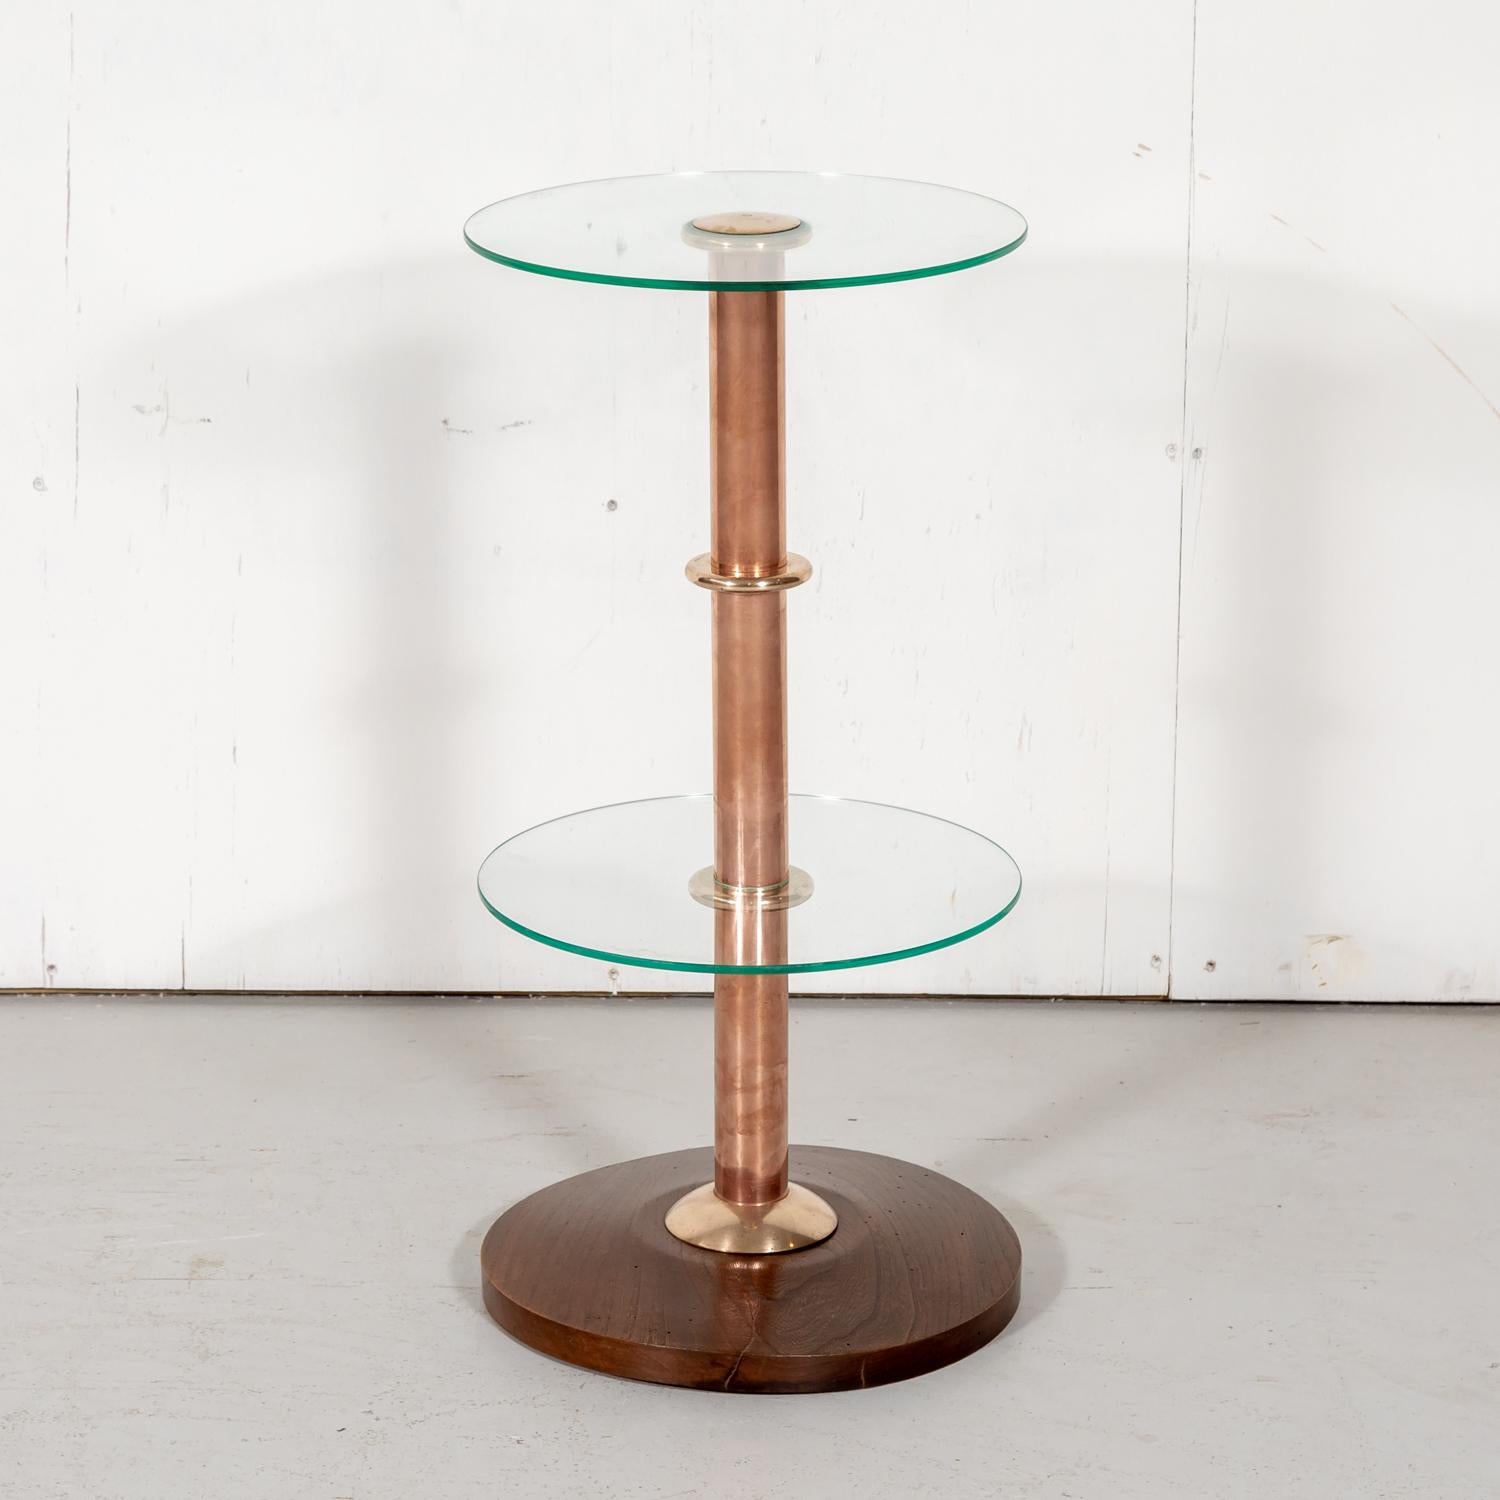 French Art Deco drink occasional or side table, circa 1930s, having a solid chestnut base and copper stem with a round glass top, glass shelf, and brass accents. The perfect size for a drink or an orchid, this sleek and chic drink table adds a